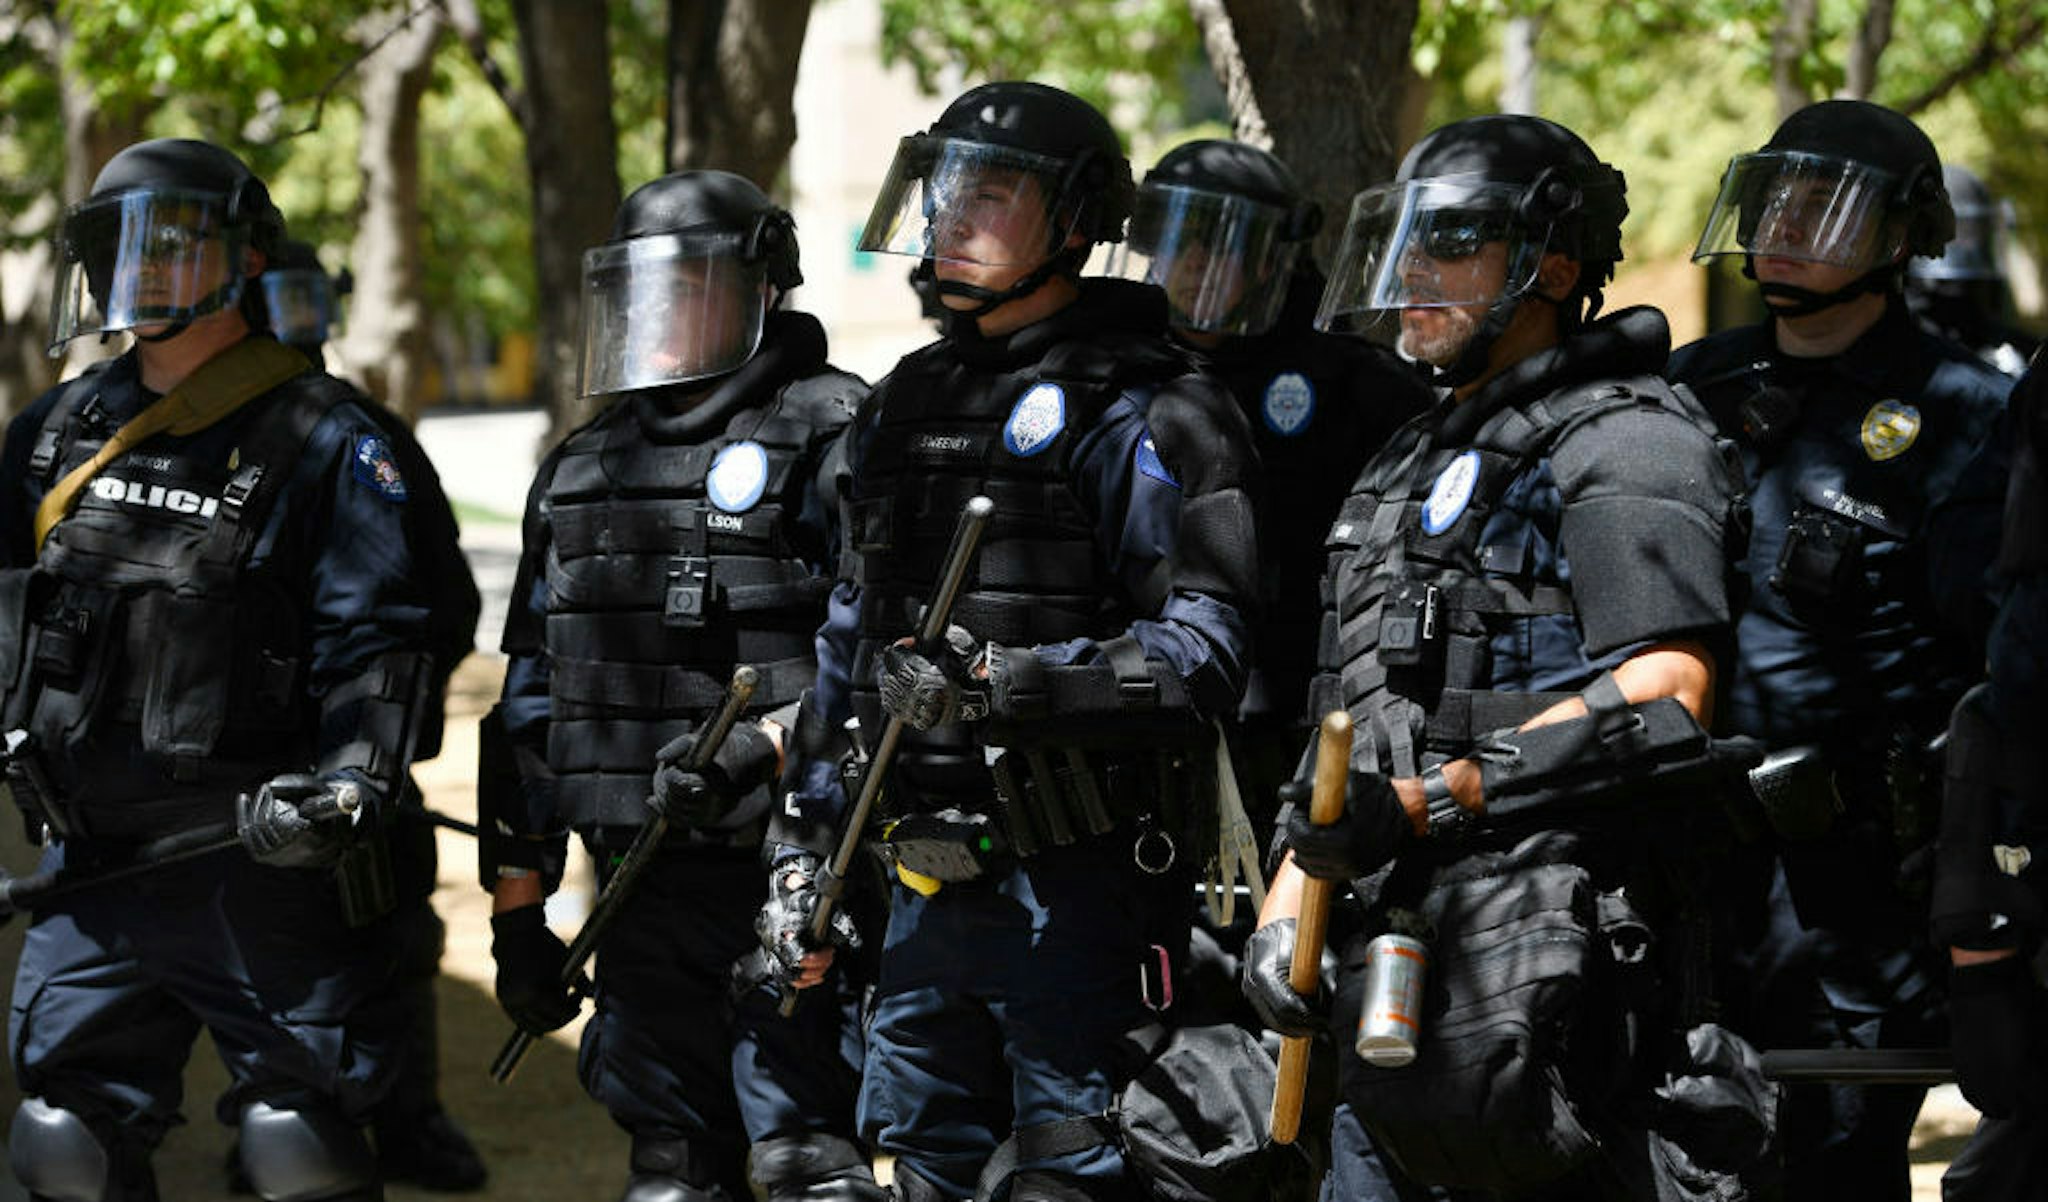 AURORA, CO - JUNE 27: Aurora police in full riot gear at the ready behind a police fence during a Elijah McClain protest in front of the Aurora Police department's headquarters at the Aurora Municipal Center June 27, 2020. Elijah McClain died August 30, 2019 several days after a struggle with Aurora police. Elijah became unconscious during the encounter with police August 24, 2019 and had a heart attack while being transported to a hospital. McClain died after being taken off life support. (Photo by Andy Cross/The Denver Post)